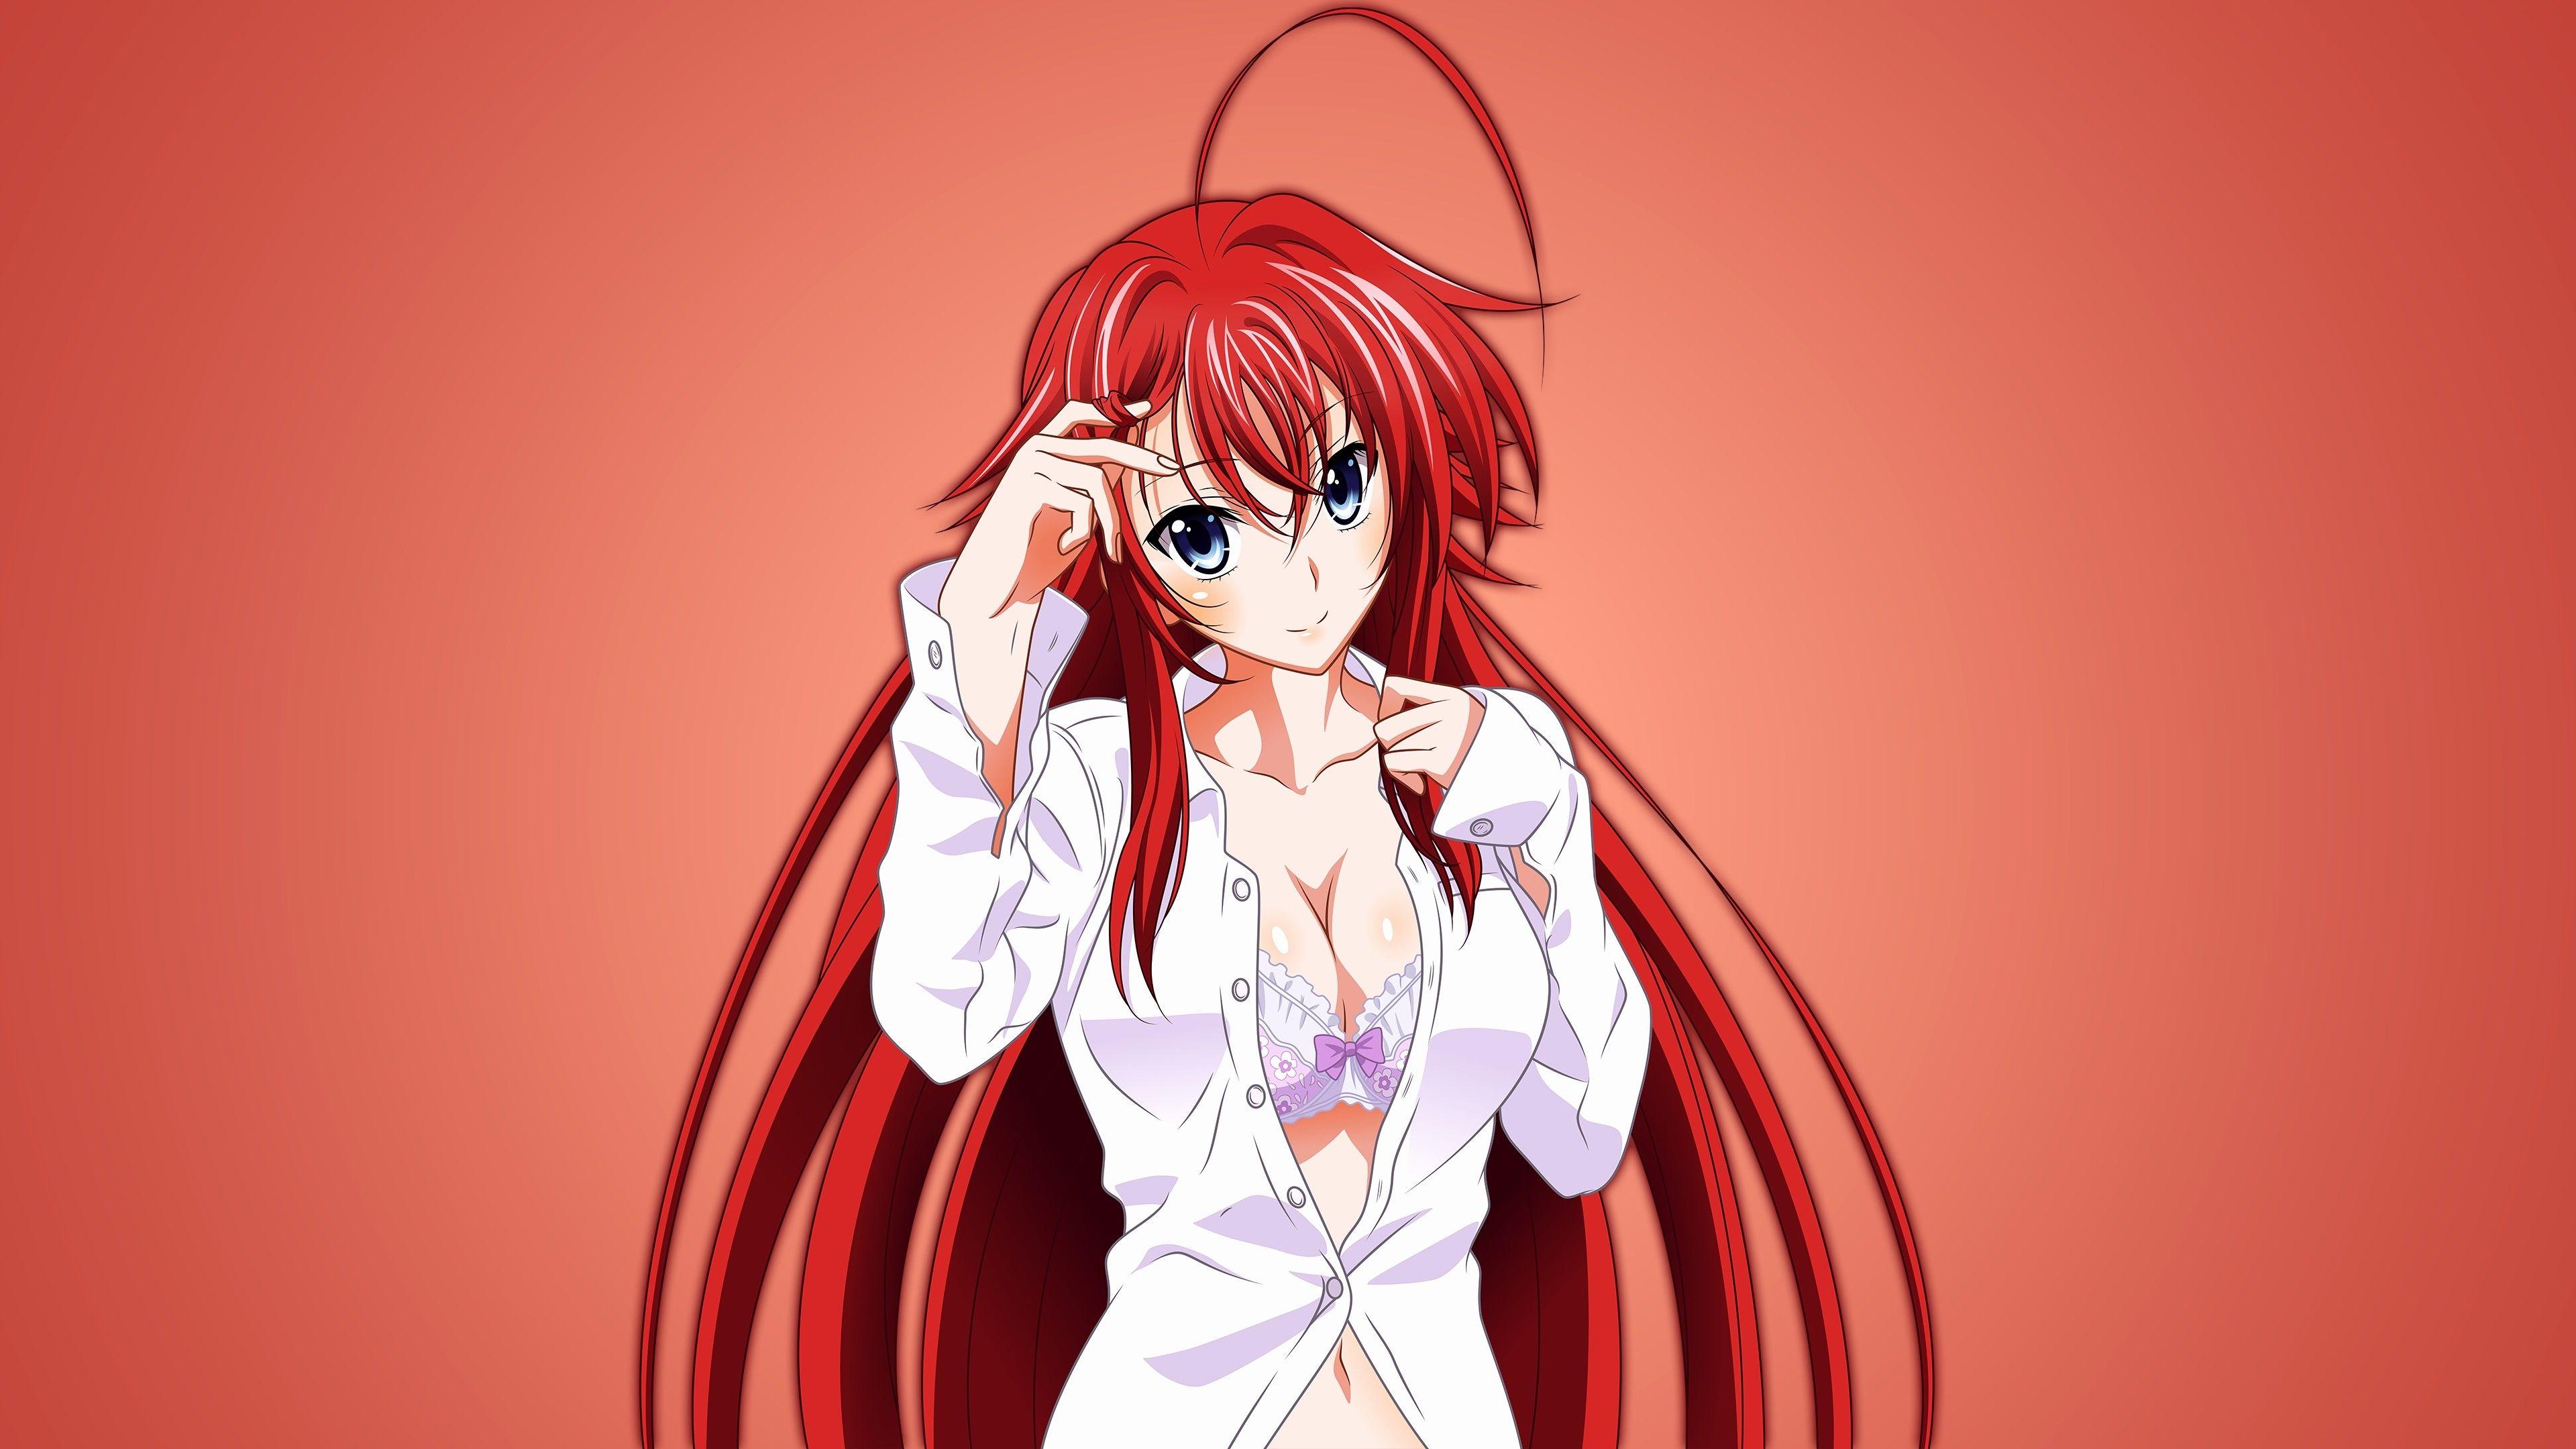 Highschool Dxd Wallpaper Lovely Rias Gremory High